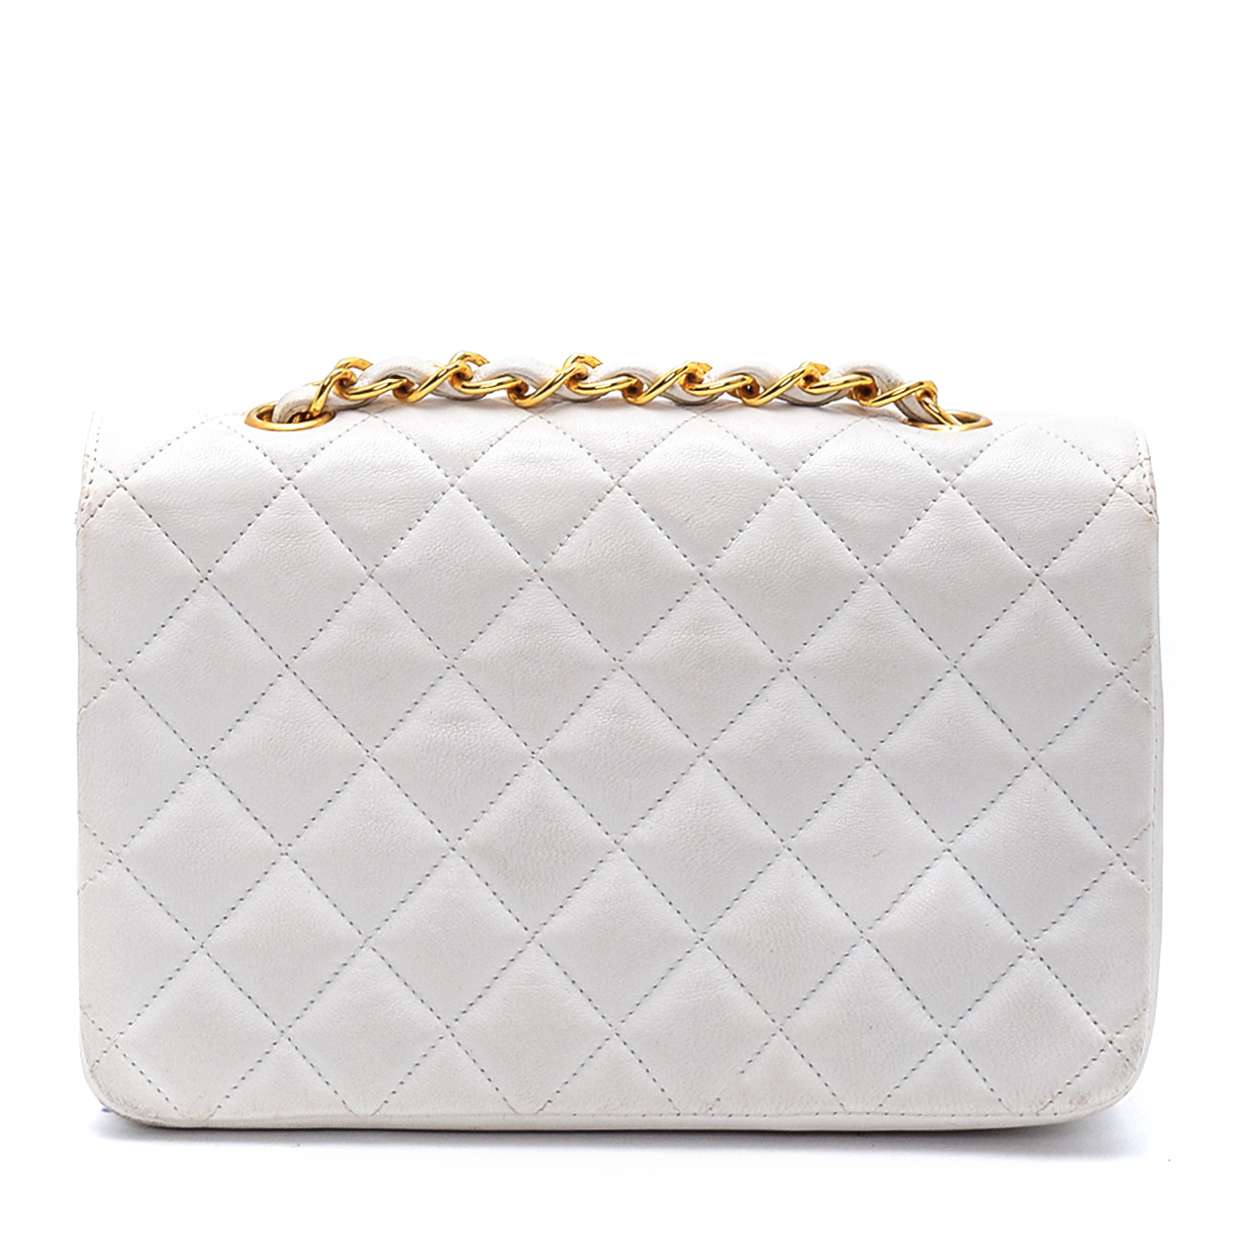 Chanel - White Quilted  Lambskin Leather Vintage Flap Crossbody Bag